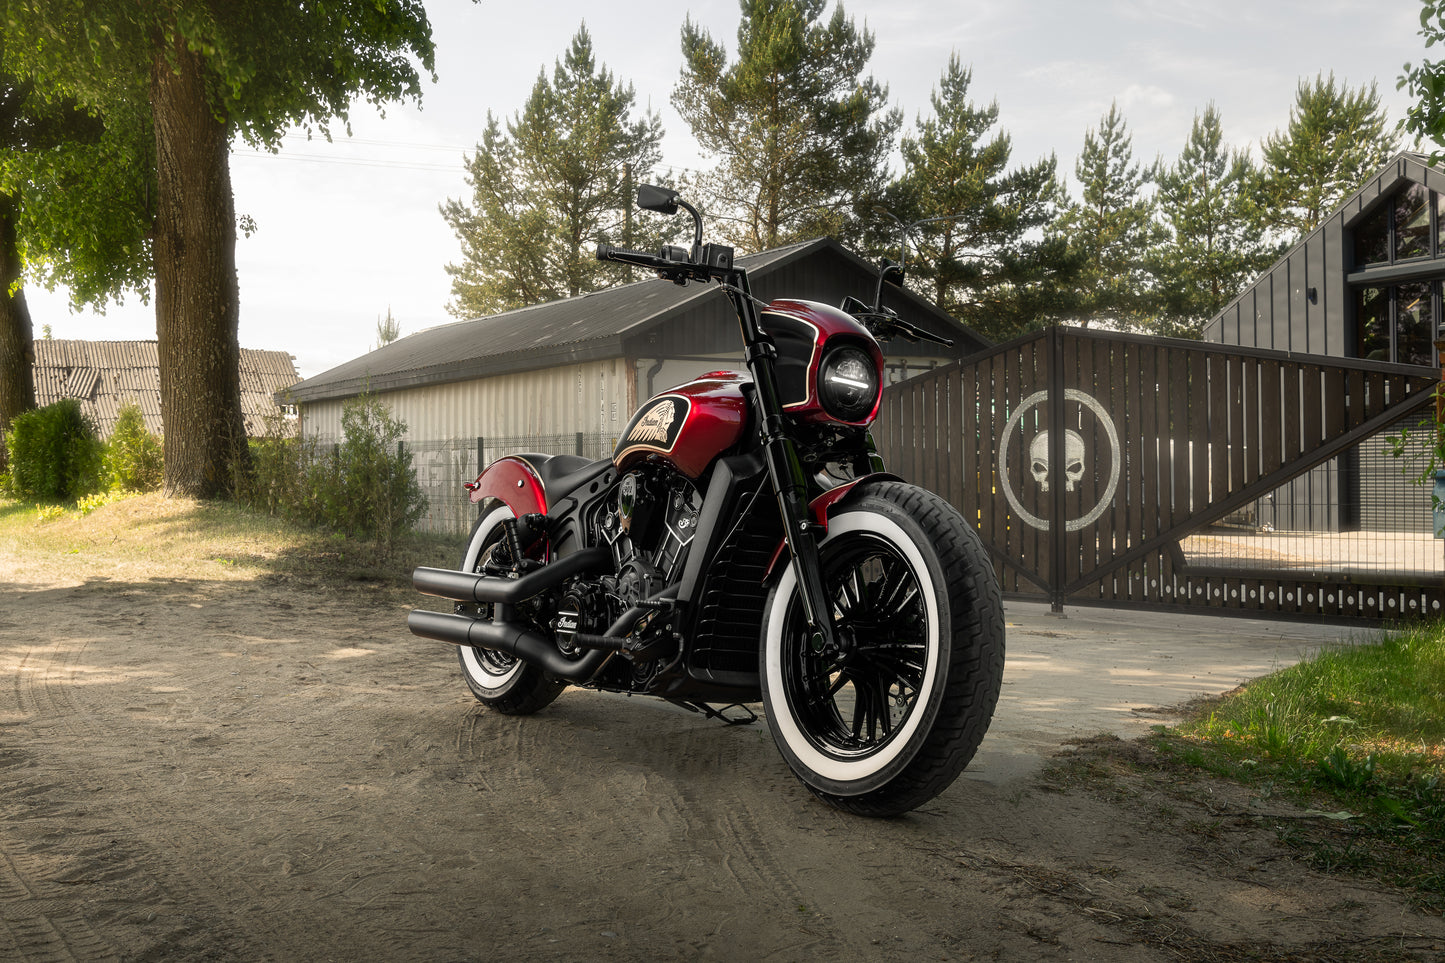 Harley Davidson motorcycle with Killer Custom "Apache" series front fender from the front with some trees and buildings in the background